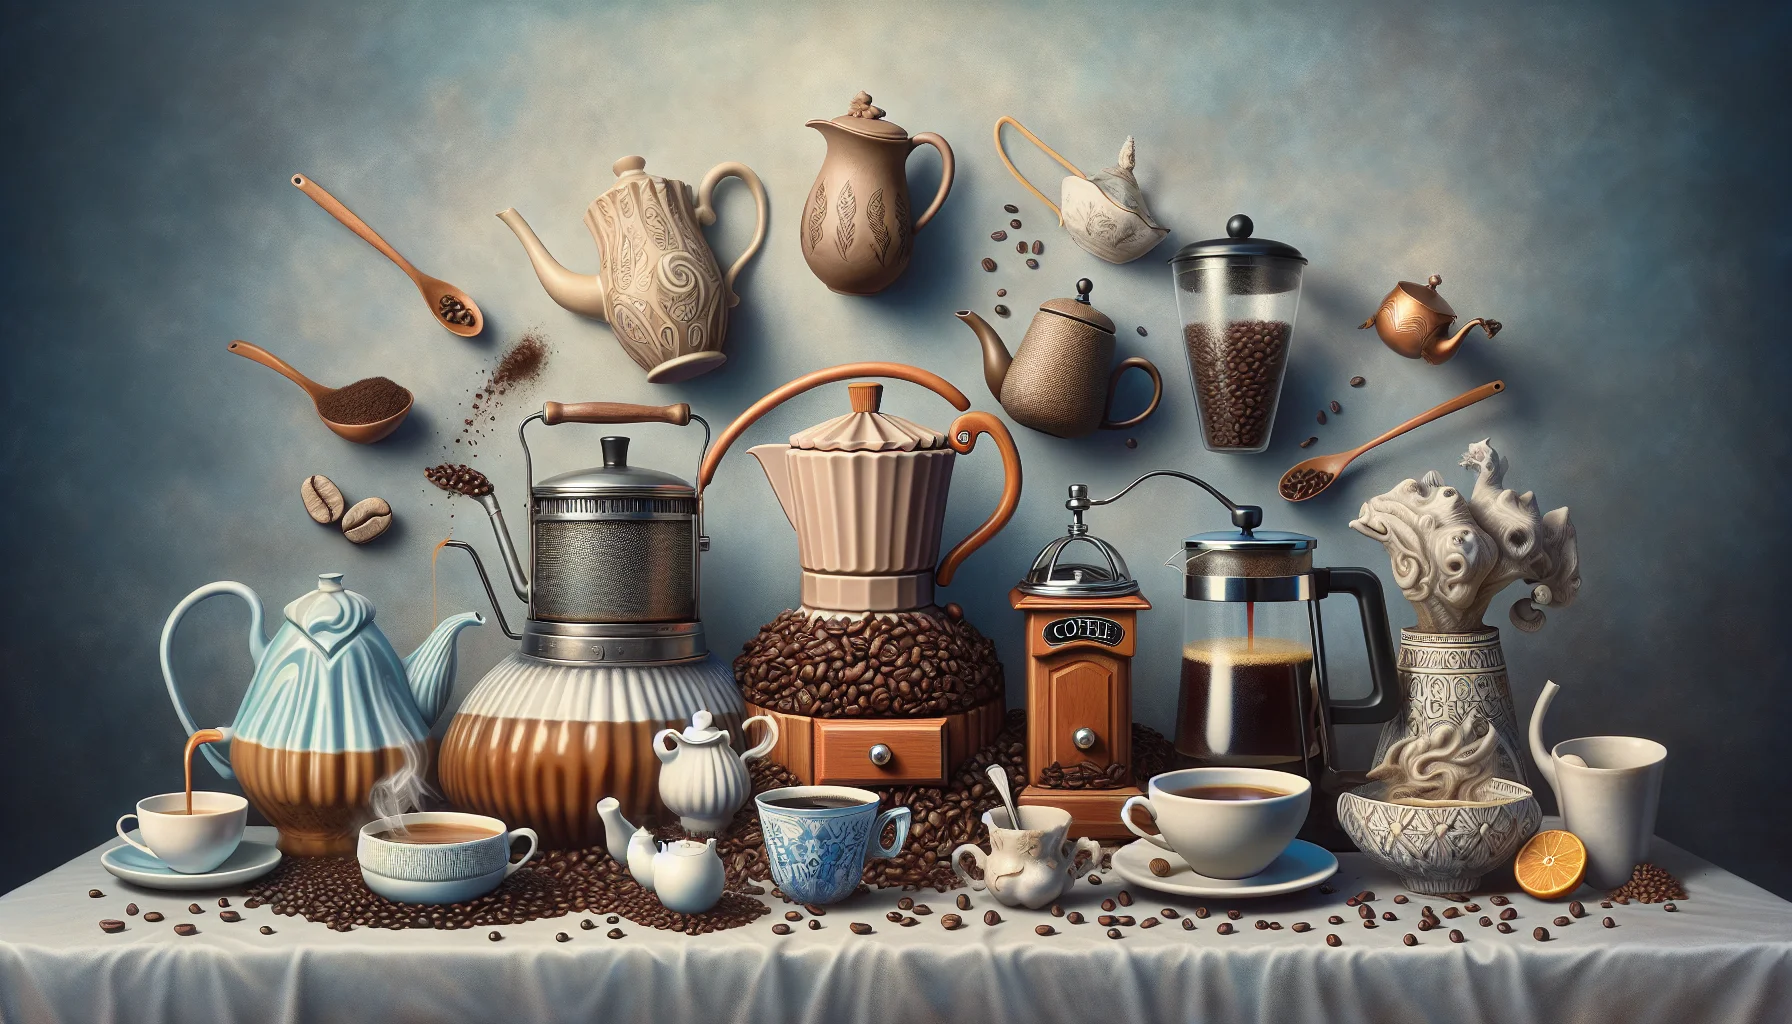 Generate a realistic image that showcases the concept of 'Brewing Faith Through Uncertainty'. Picture a whimsical and humorous scenario in which both tea and coffee brewing techniques are depicted. Imagine each process as metaphors for faith and uncertainty. Different tea and coffee products are scattered around - coffee beans, a traditional ceramic teapot, and a French press, each contributing to the charm and wit of the scene. The juxtaposition of these beverages - one traditionally calm and the other high-energy - amplifies the concept in an engaging, unique way.